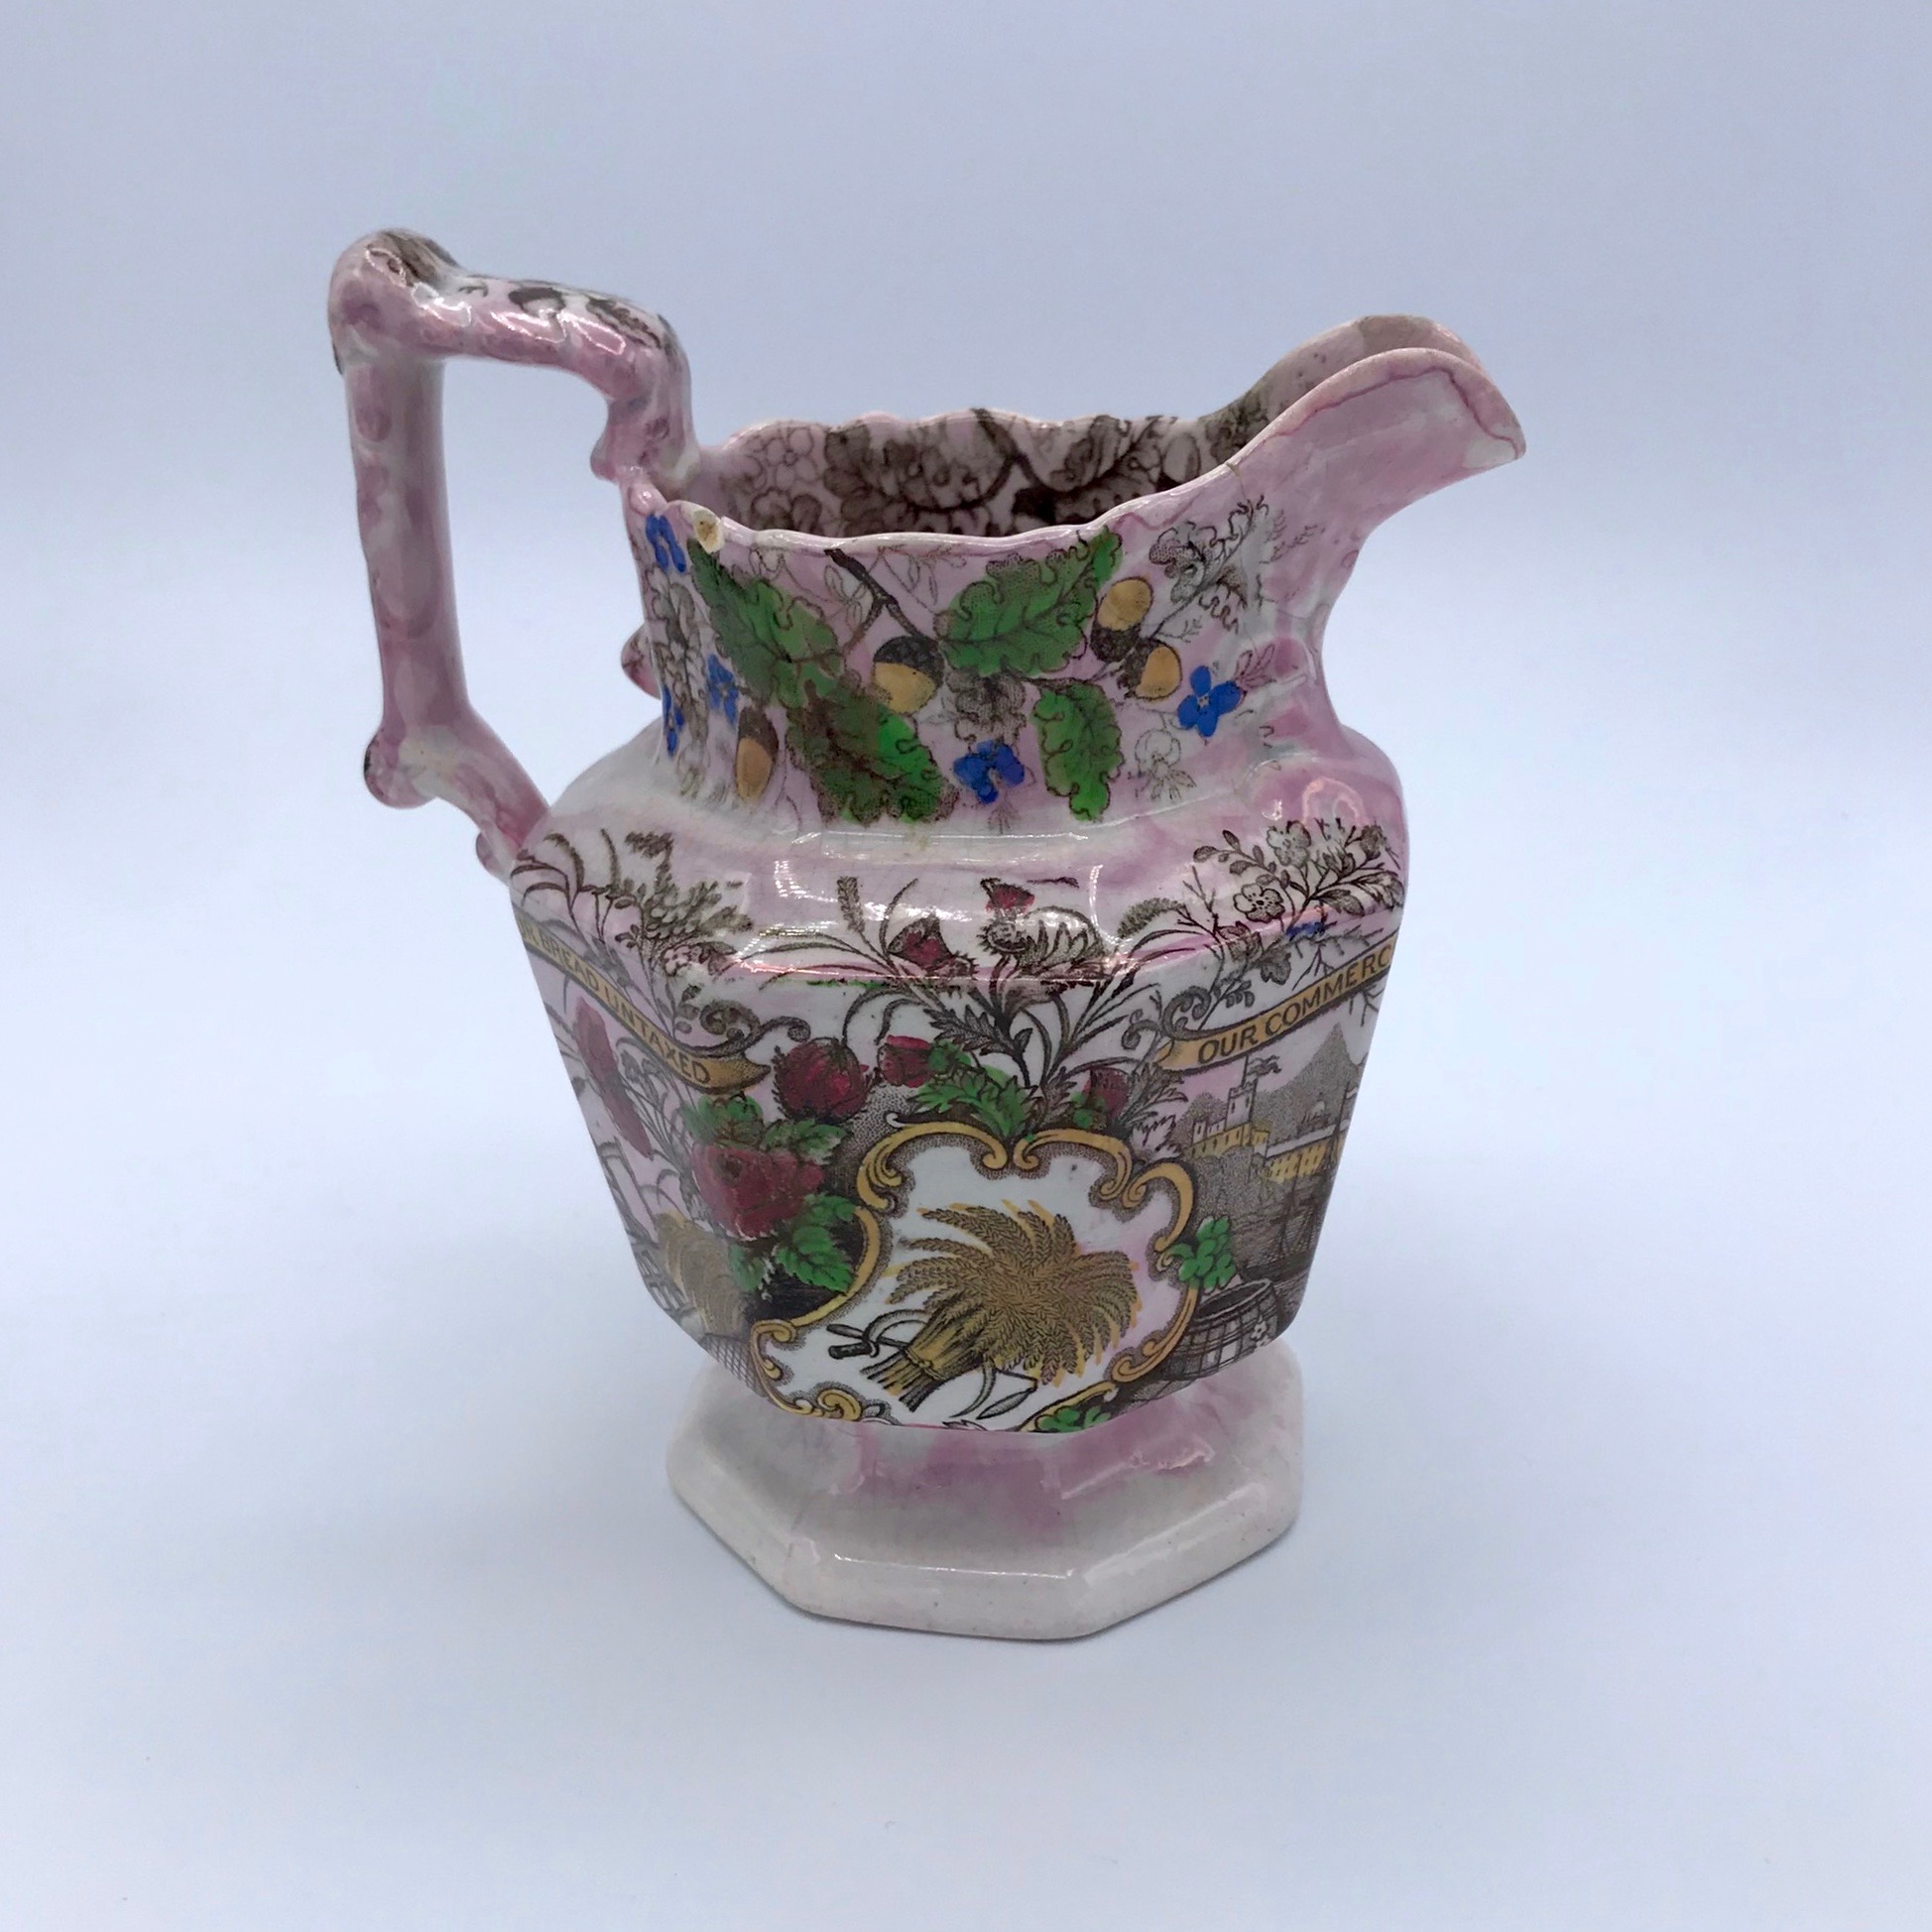 "Our Bread Untaxed" Pink Lustre Jug